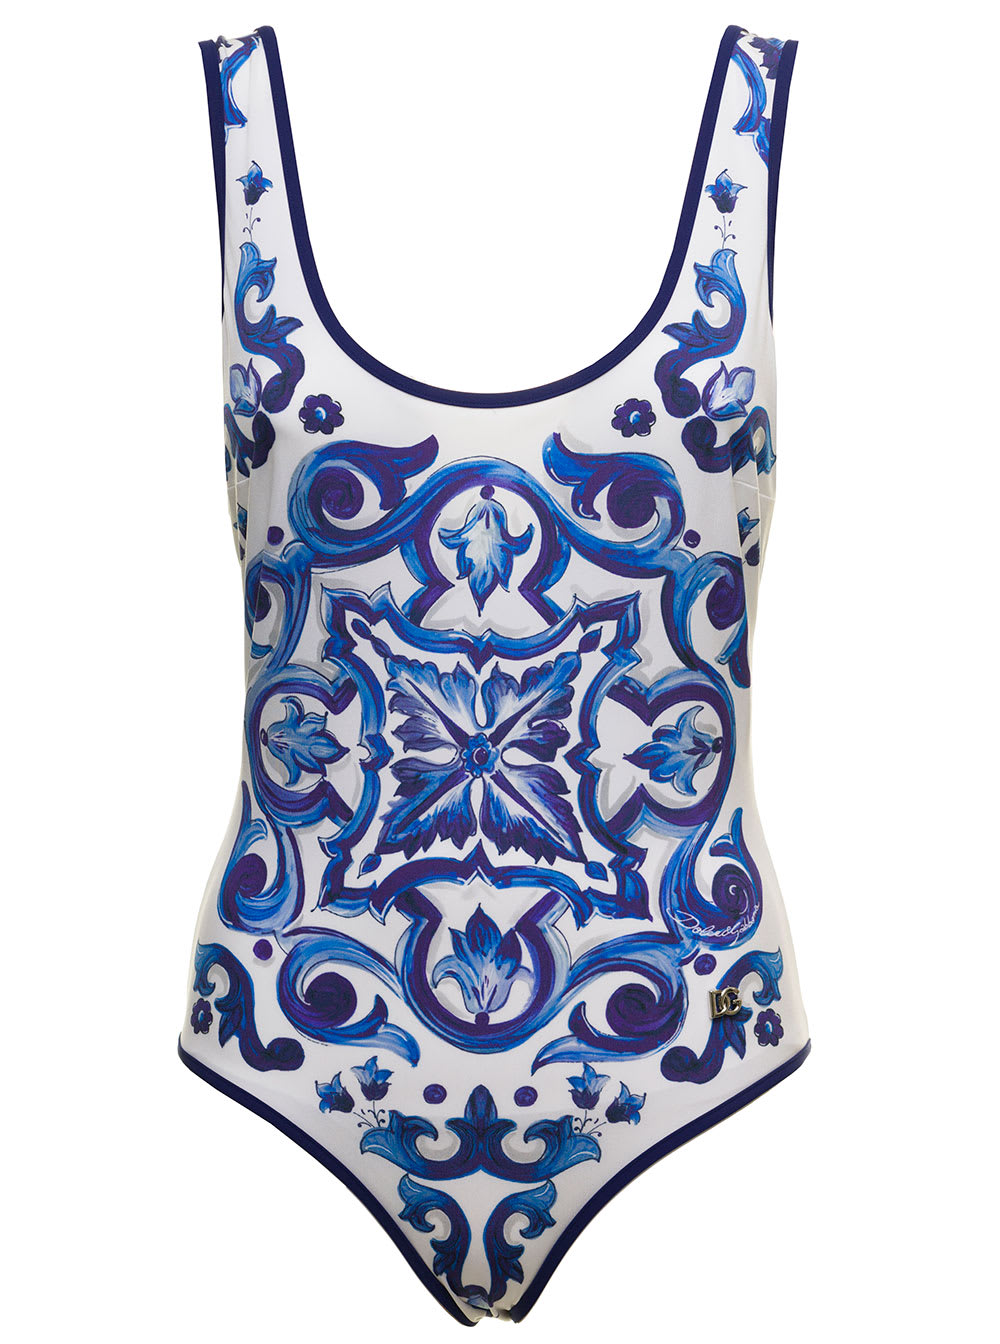 DOLCE & GABBANA MAIOLICA WHITE AND BLUE LYCRA SWIMSUIT WOMAN